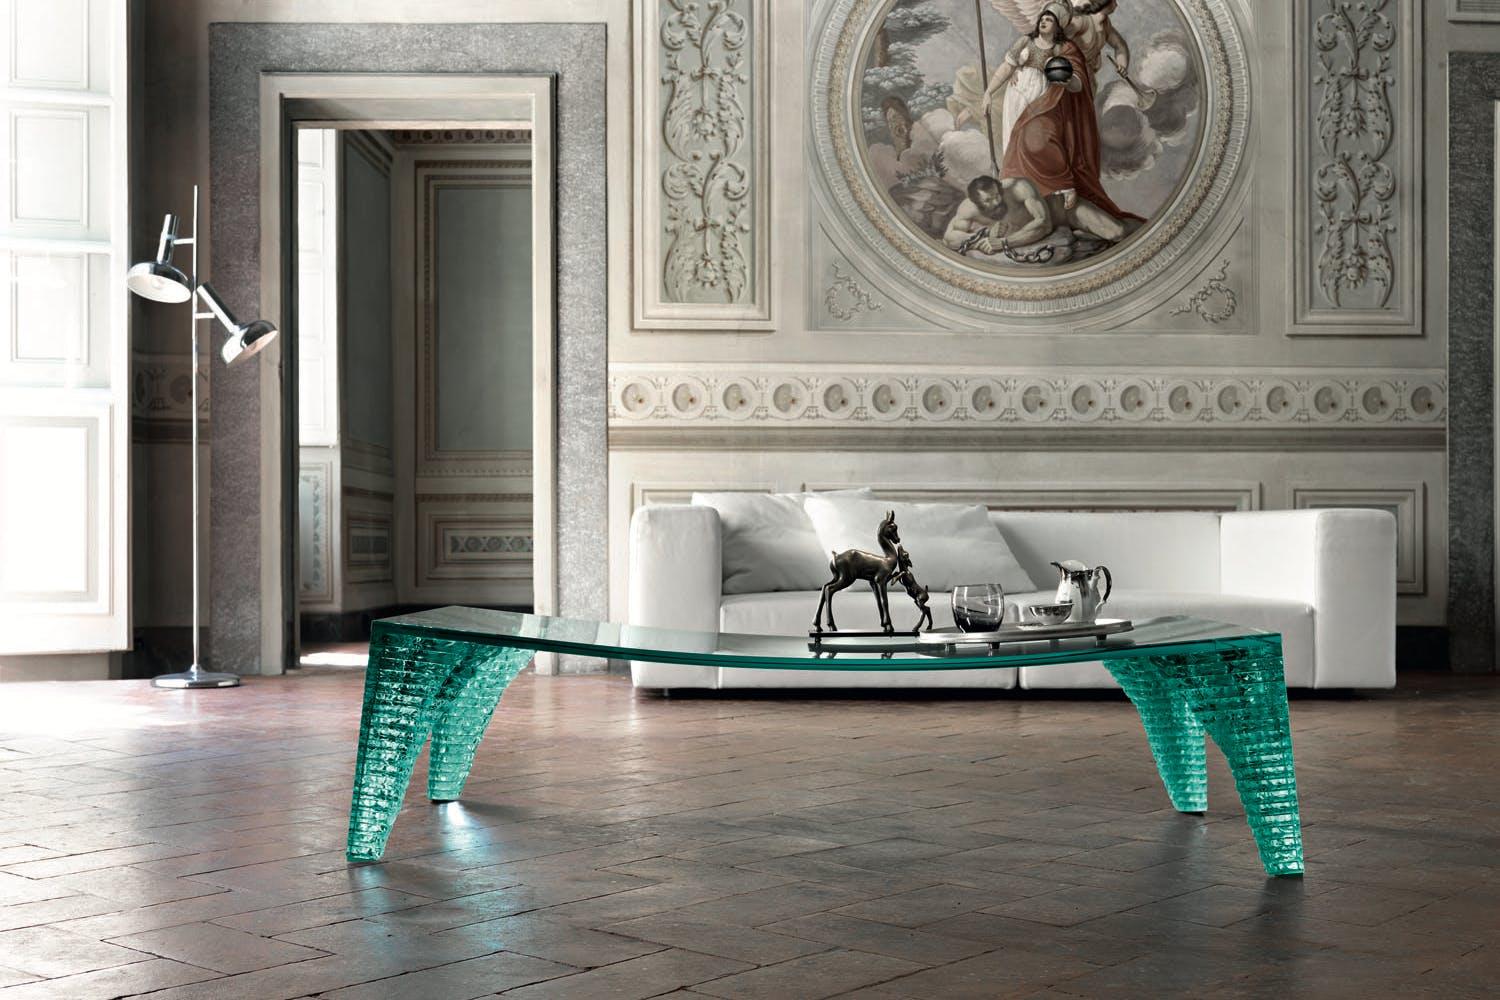 The handmade sculptural Atlas coffee table is one of Fiam Italia’s most legendary productions. Designed by a renowned British sculptor Danny Lane, Atlas features layers of straight and curved edge glass sculpted entirely by hand. The sharp